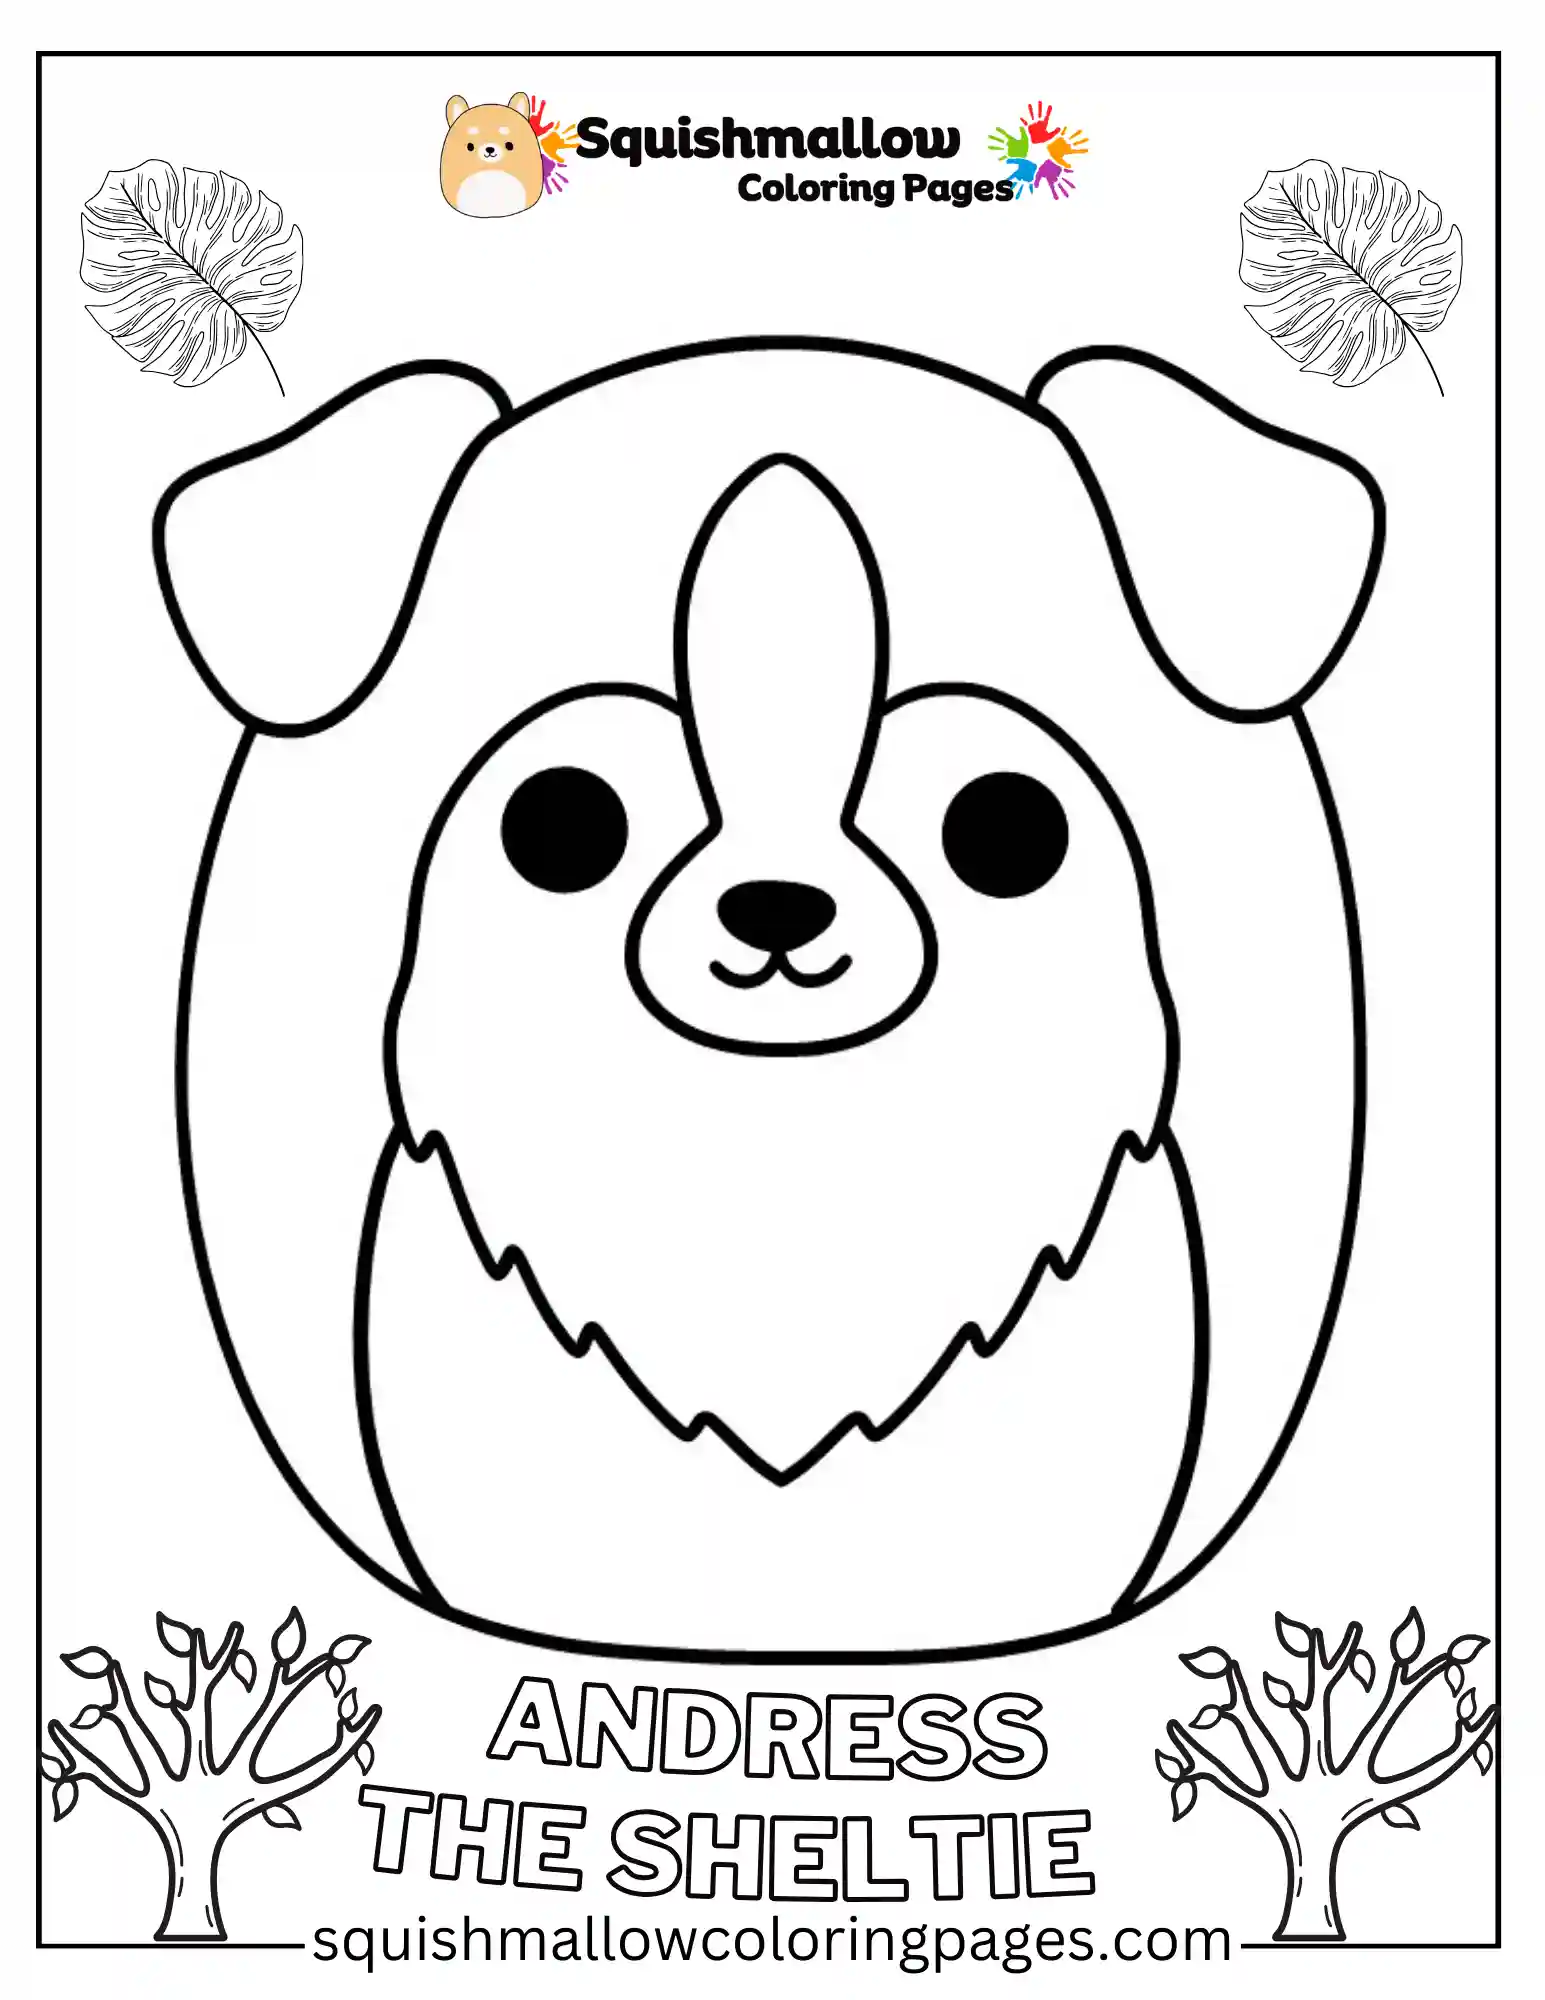 Andress The Sheltie Squishmallow Coloring Pages